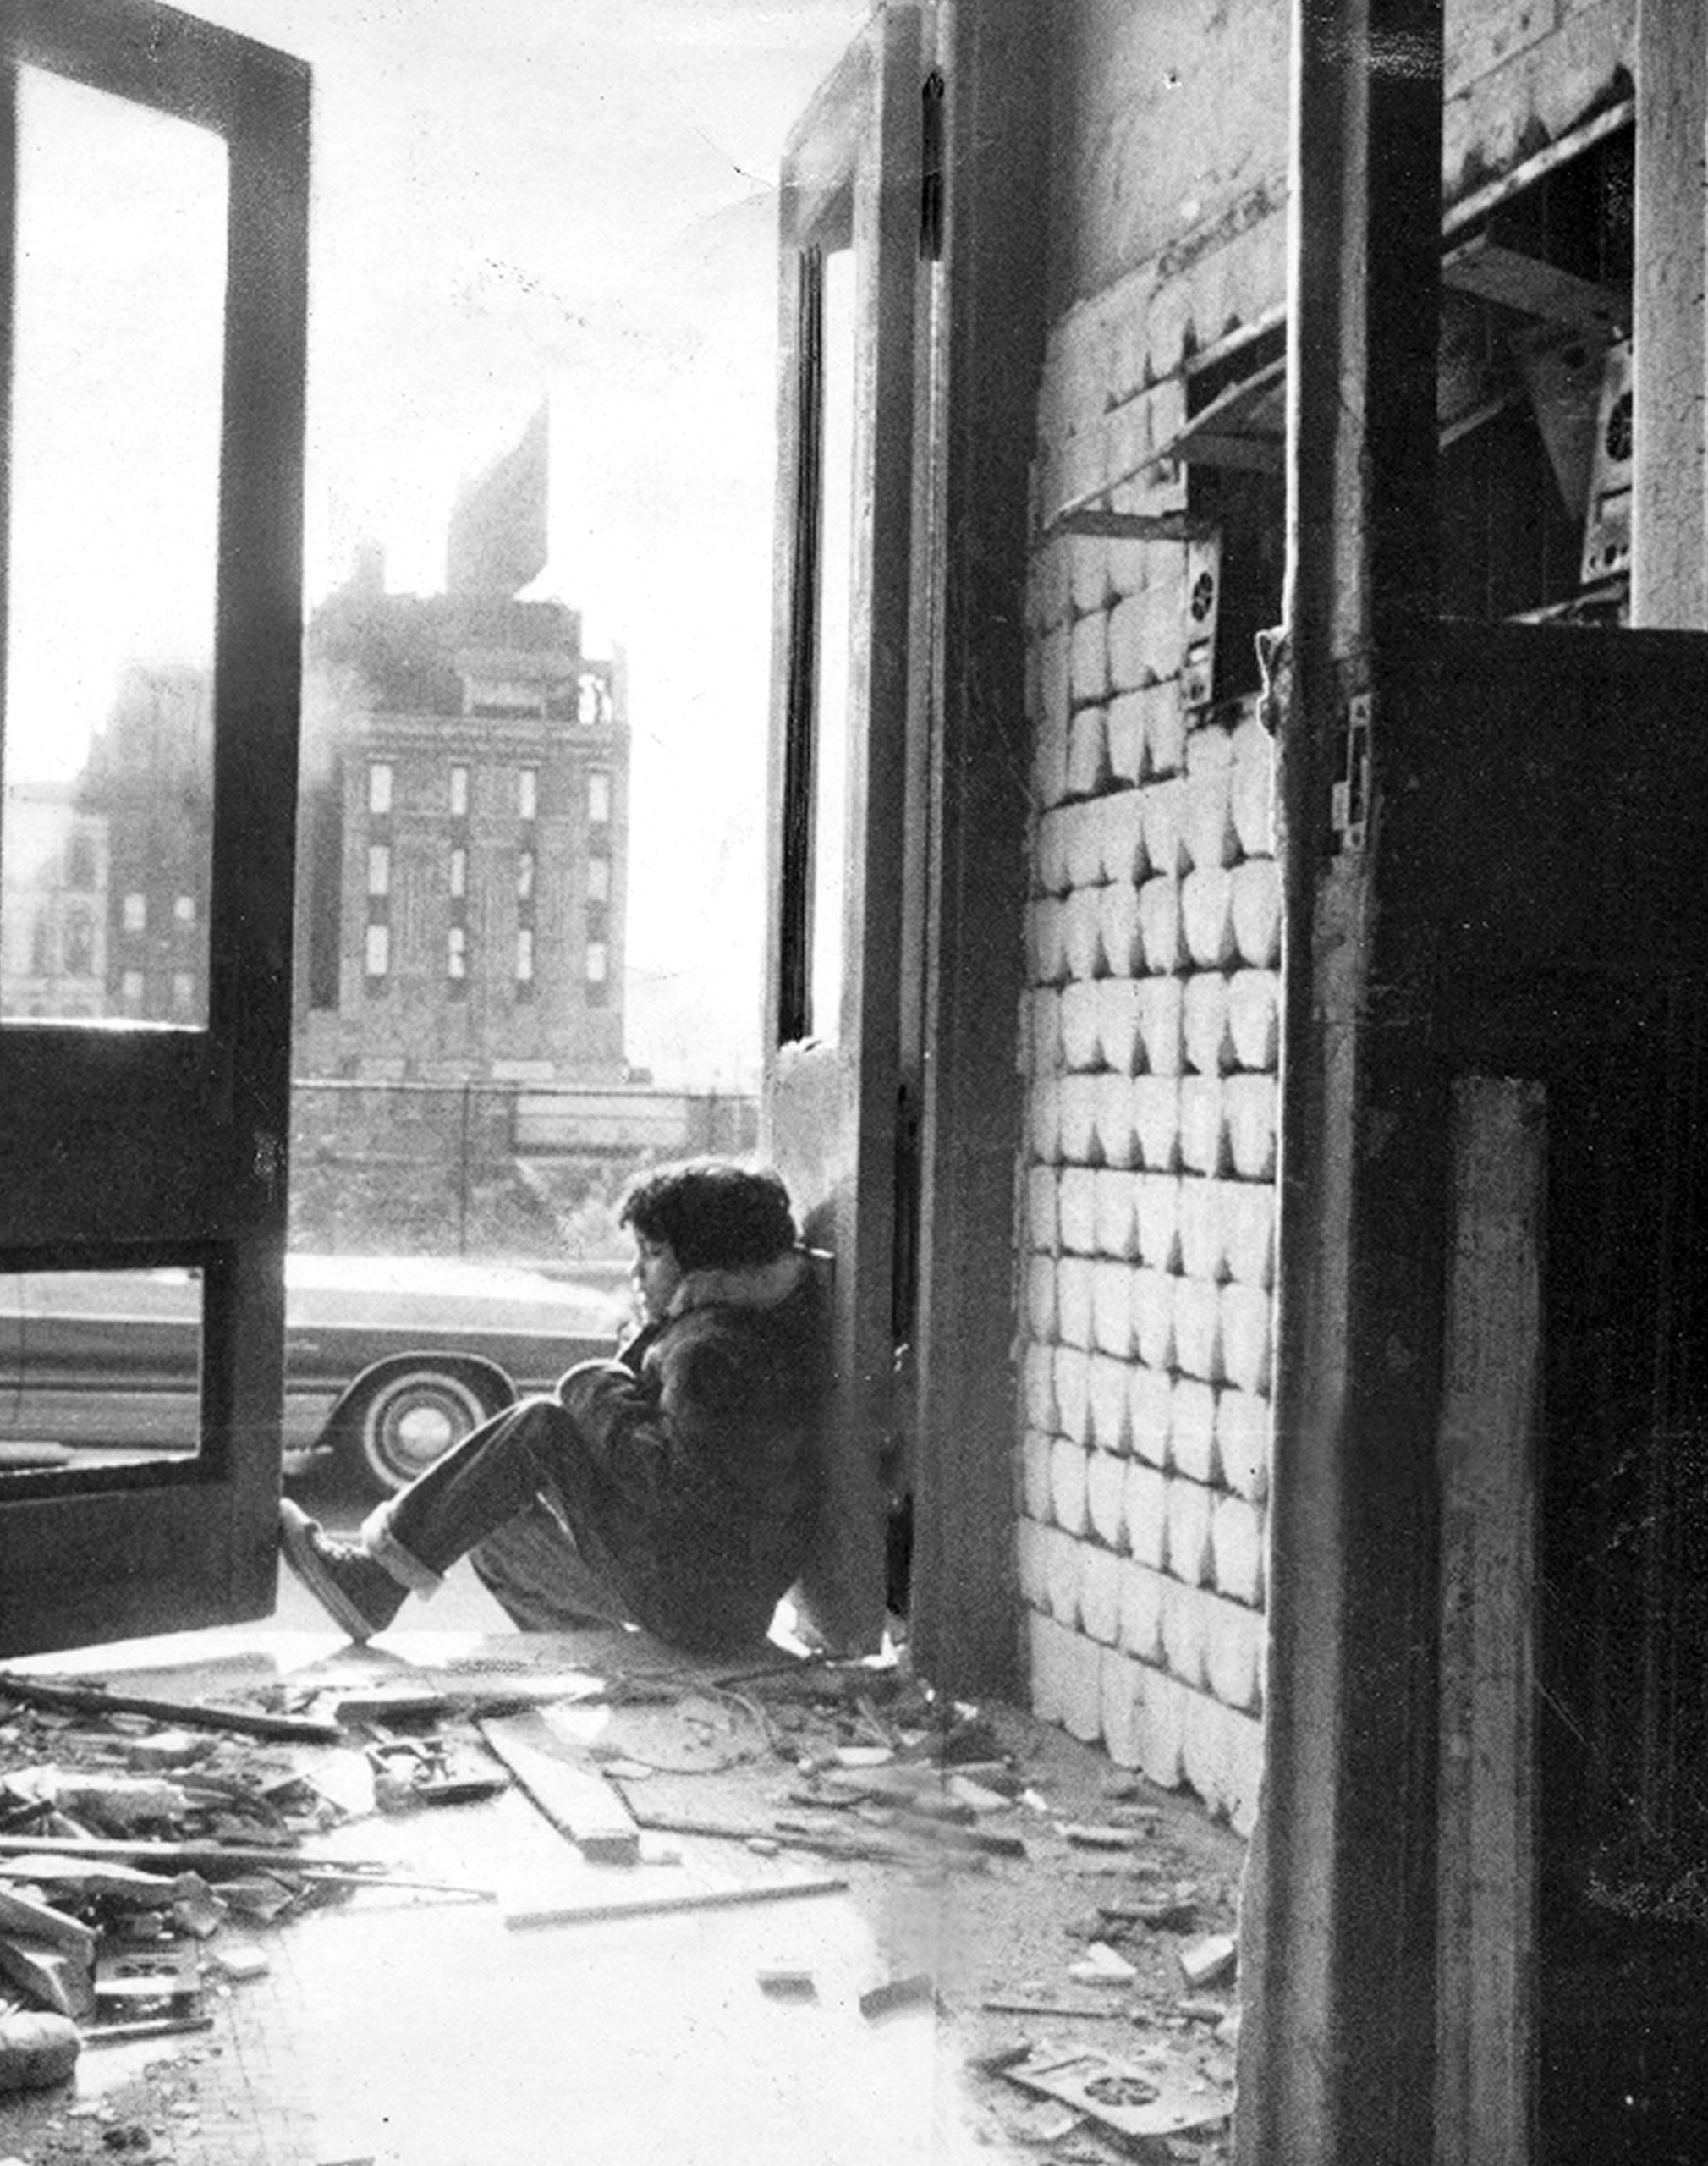 Child sits in doorway of rundown building at 135th St and Willis Ave. in the South Bronx, 1976.